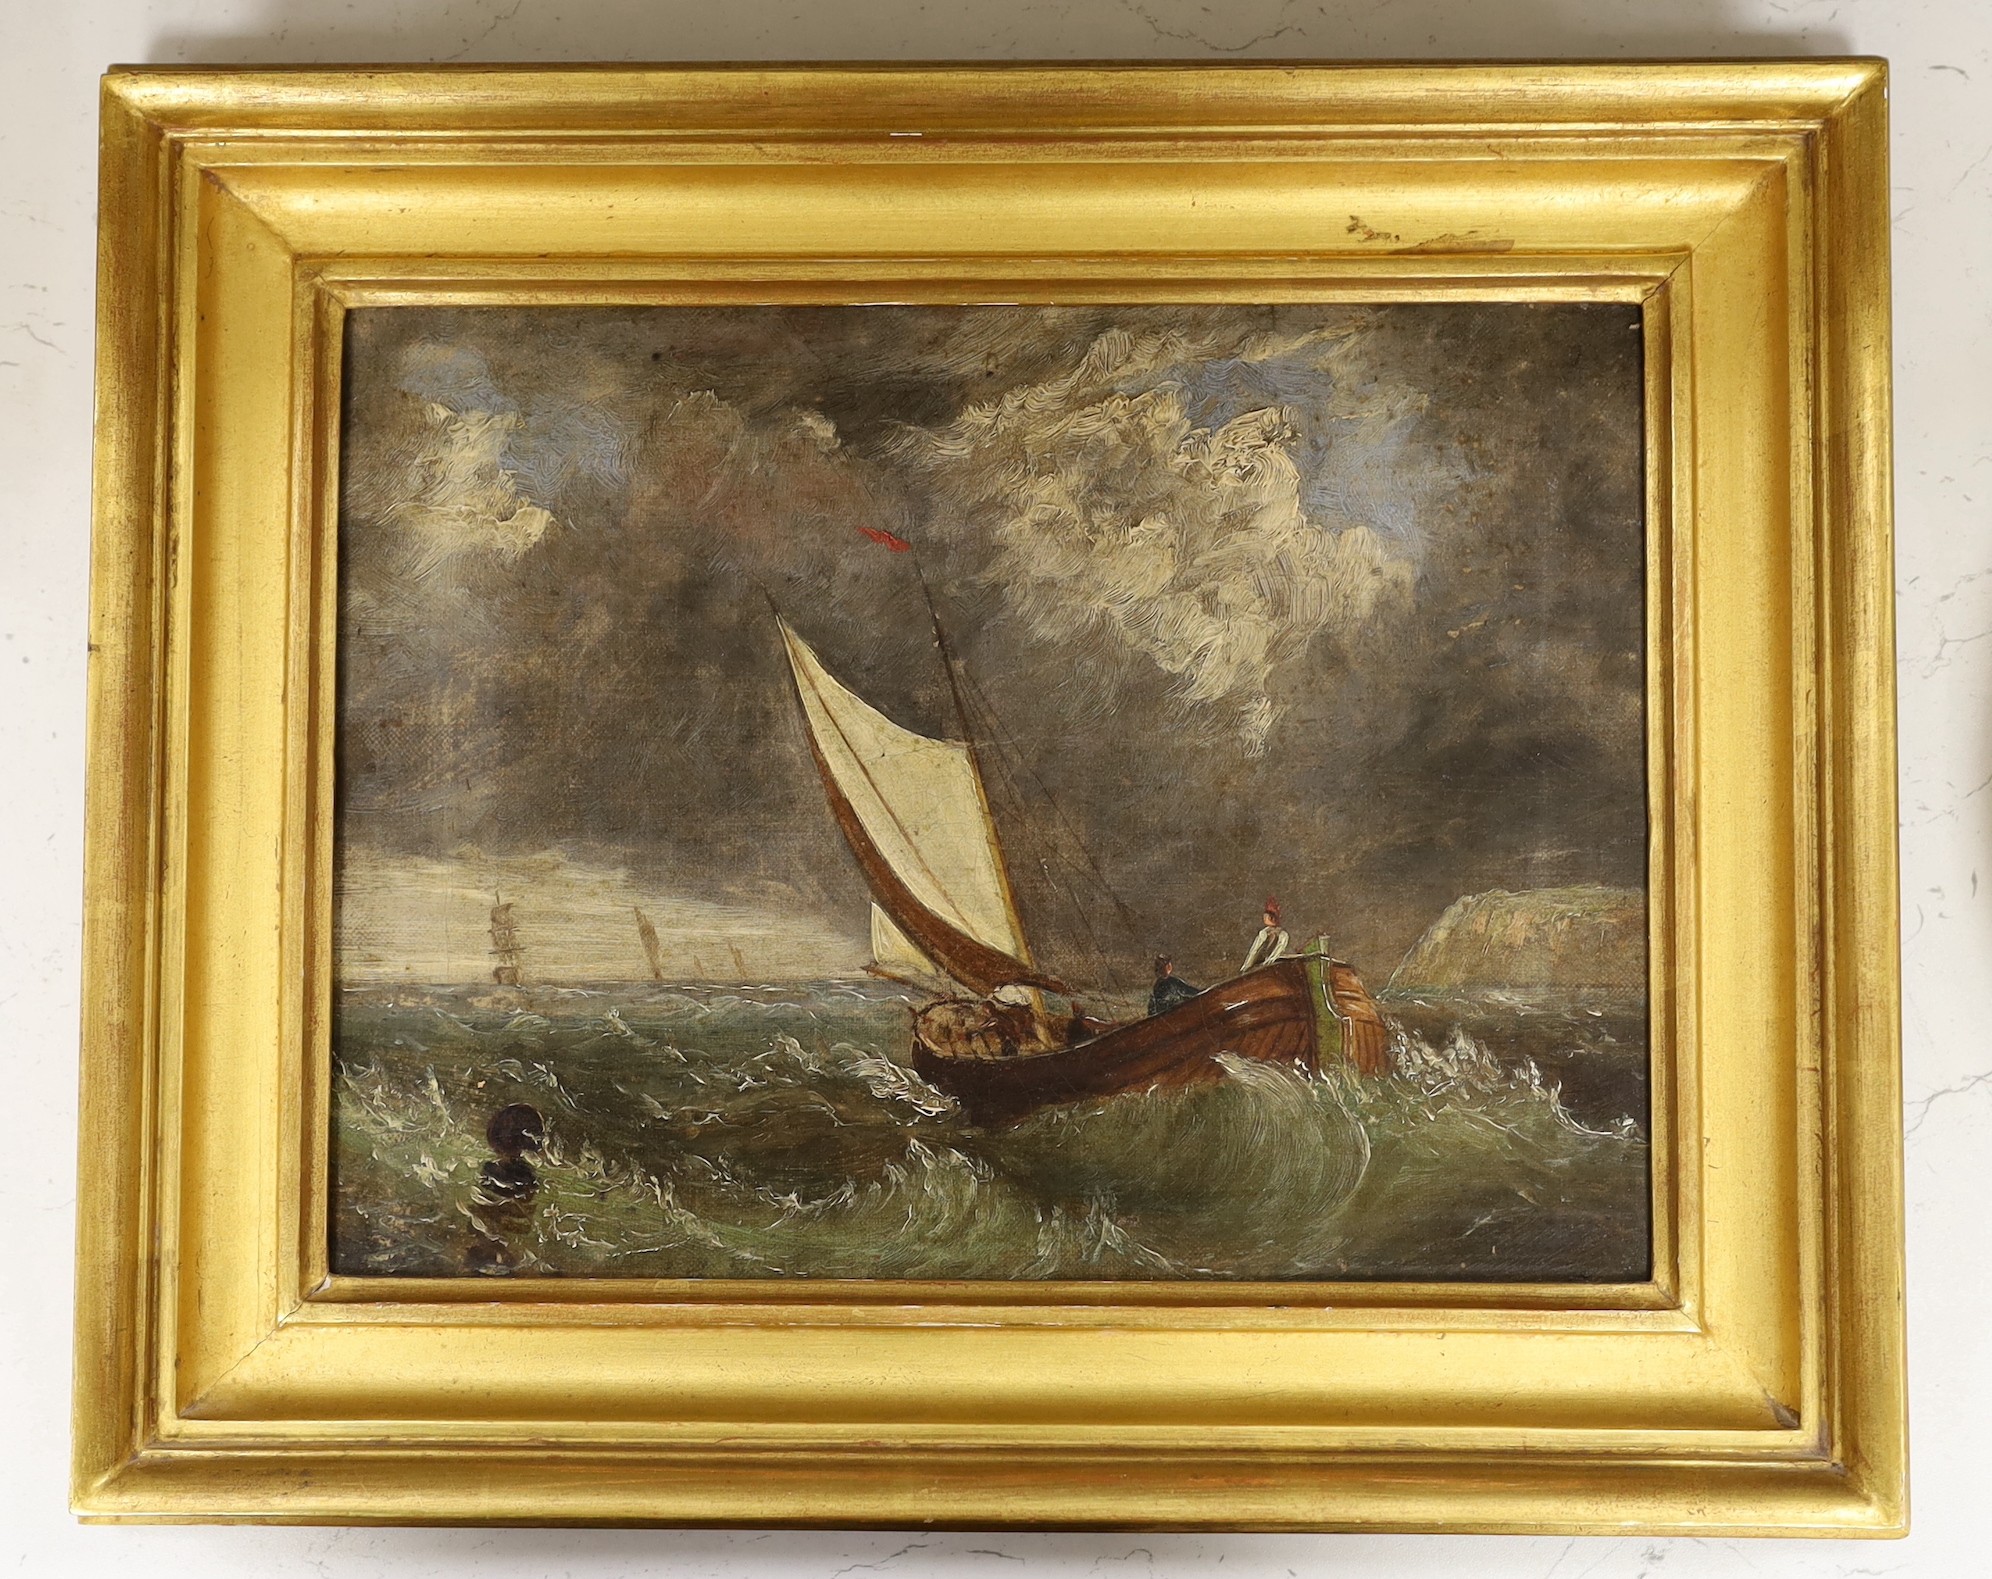 19th century English School, oil on canvas, Fishing boat leaving harbour, 22 x 29cm